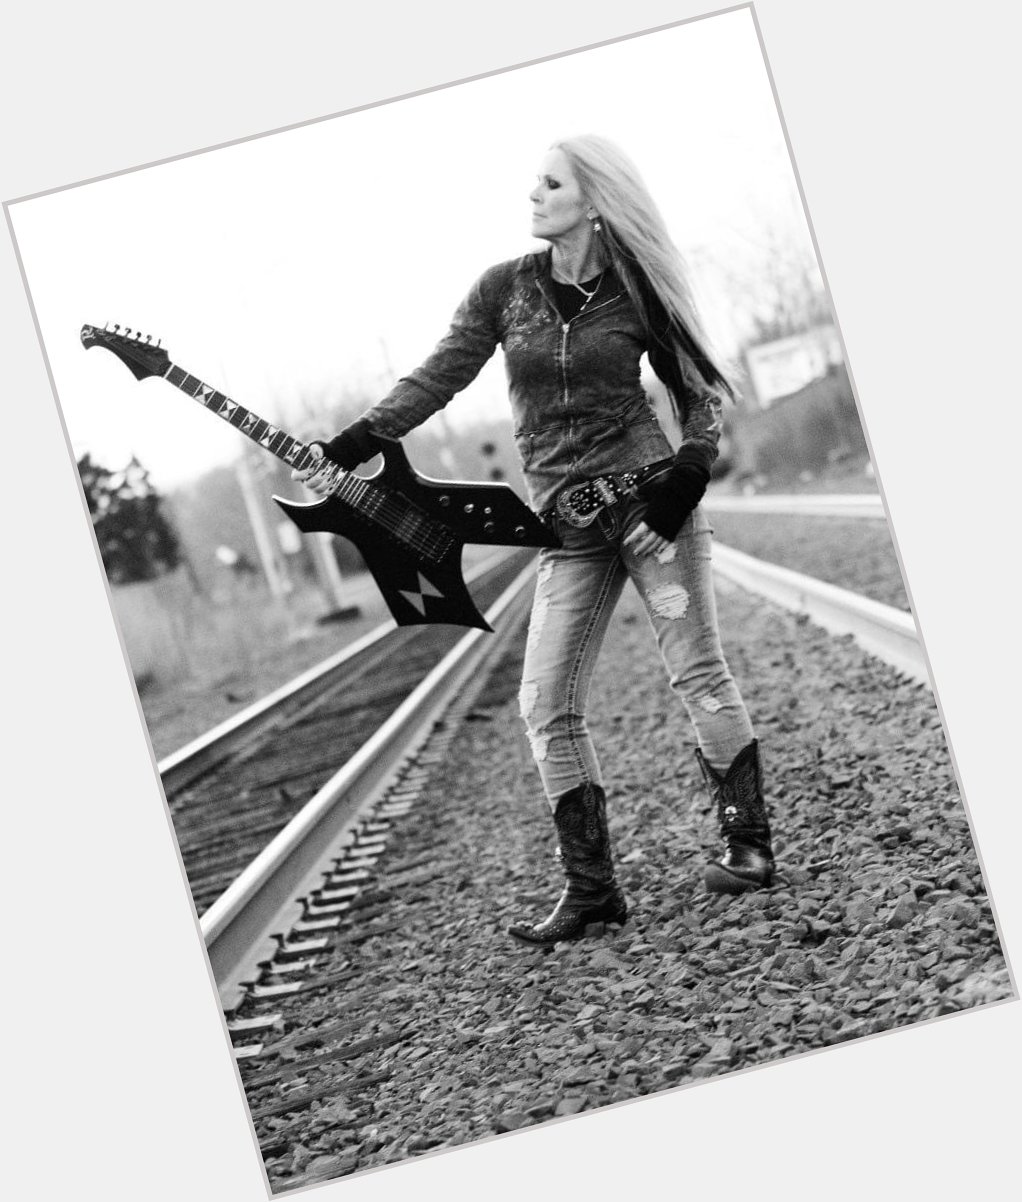 Happy Birthday to Lita Ford who turns 63 today! 